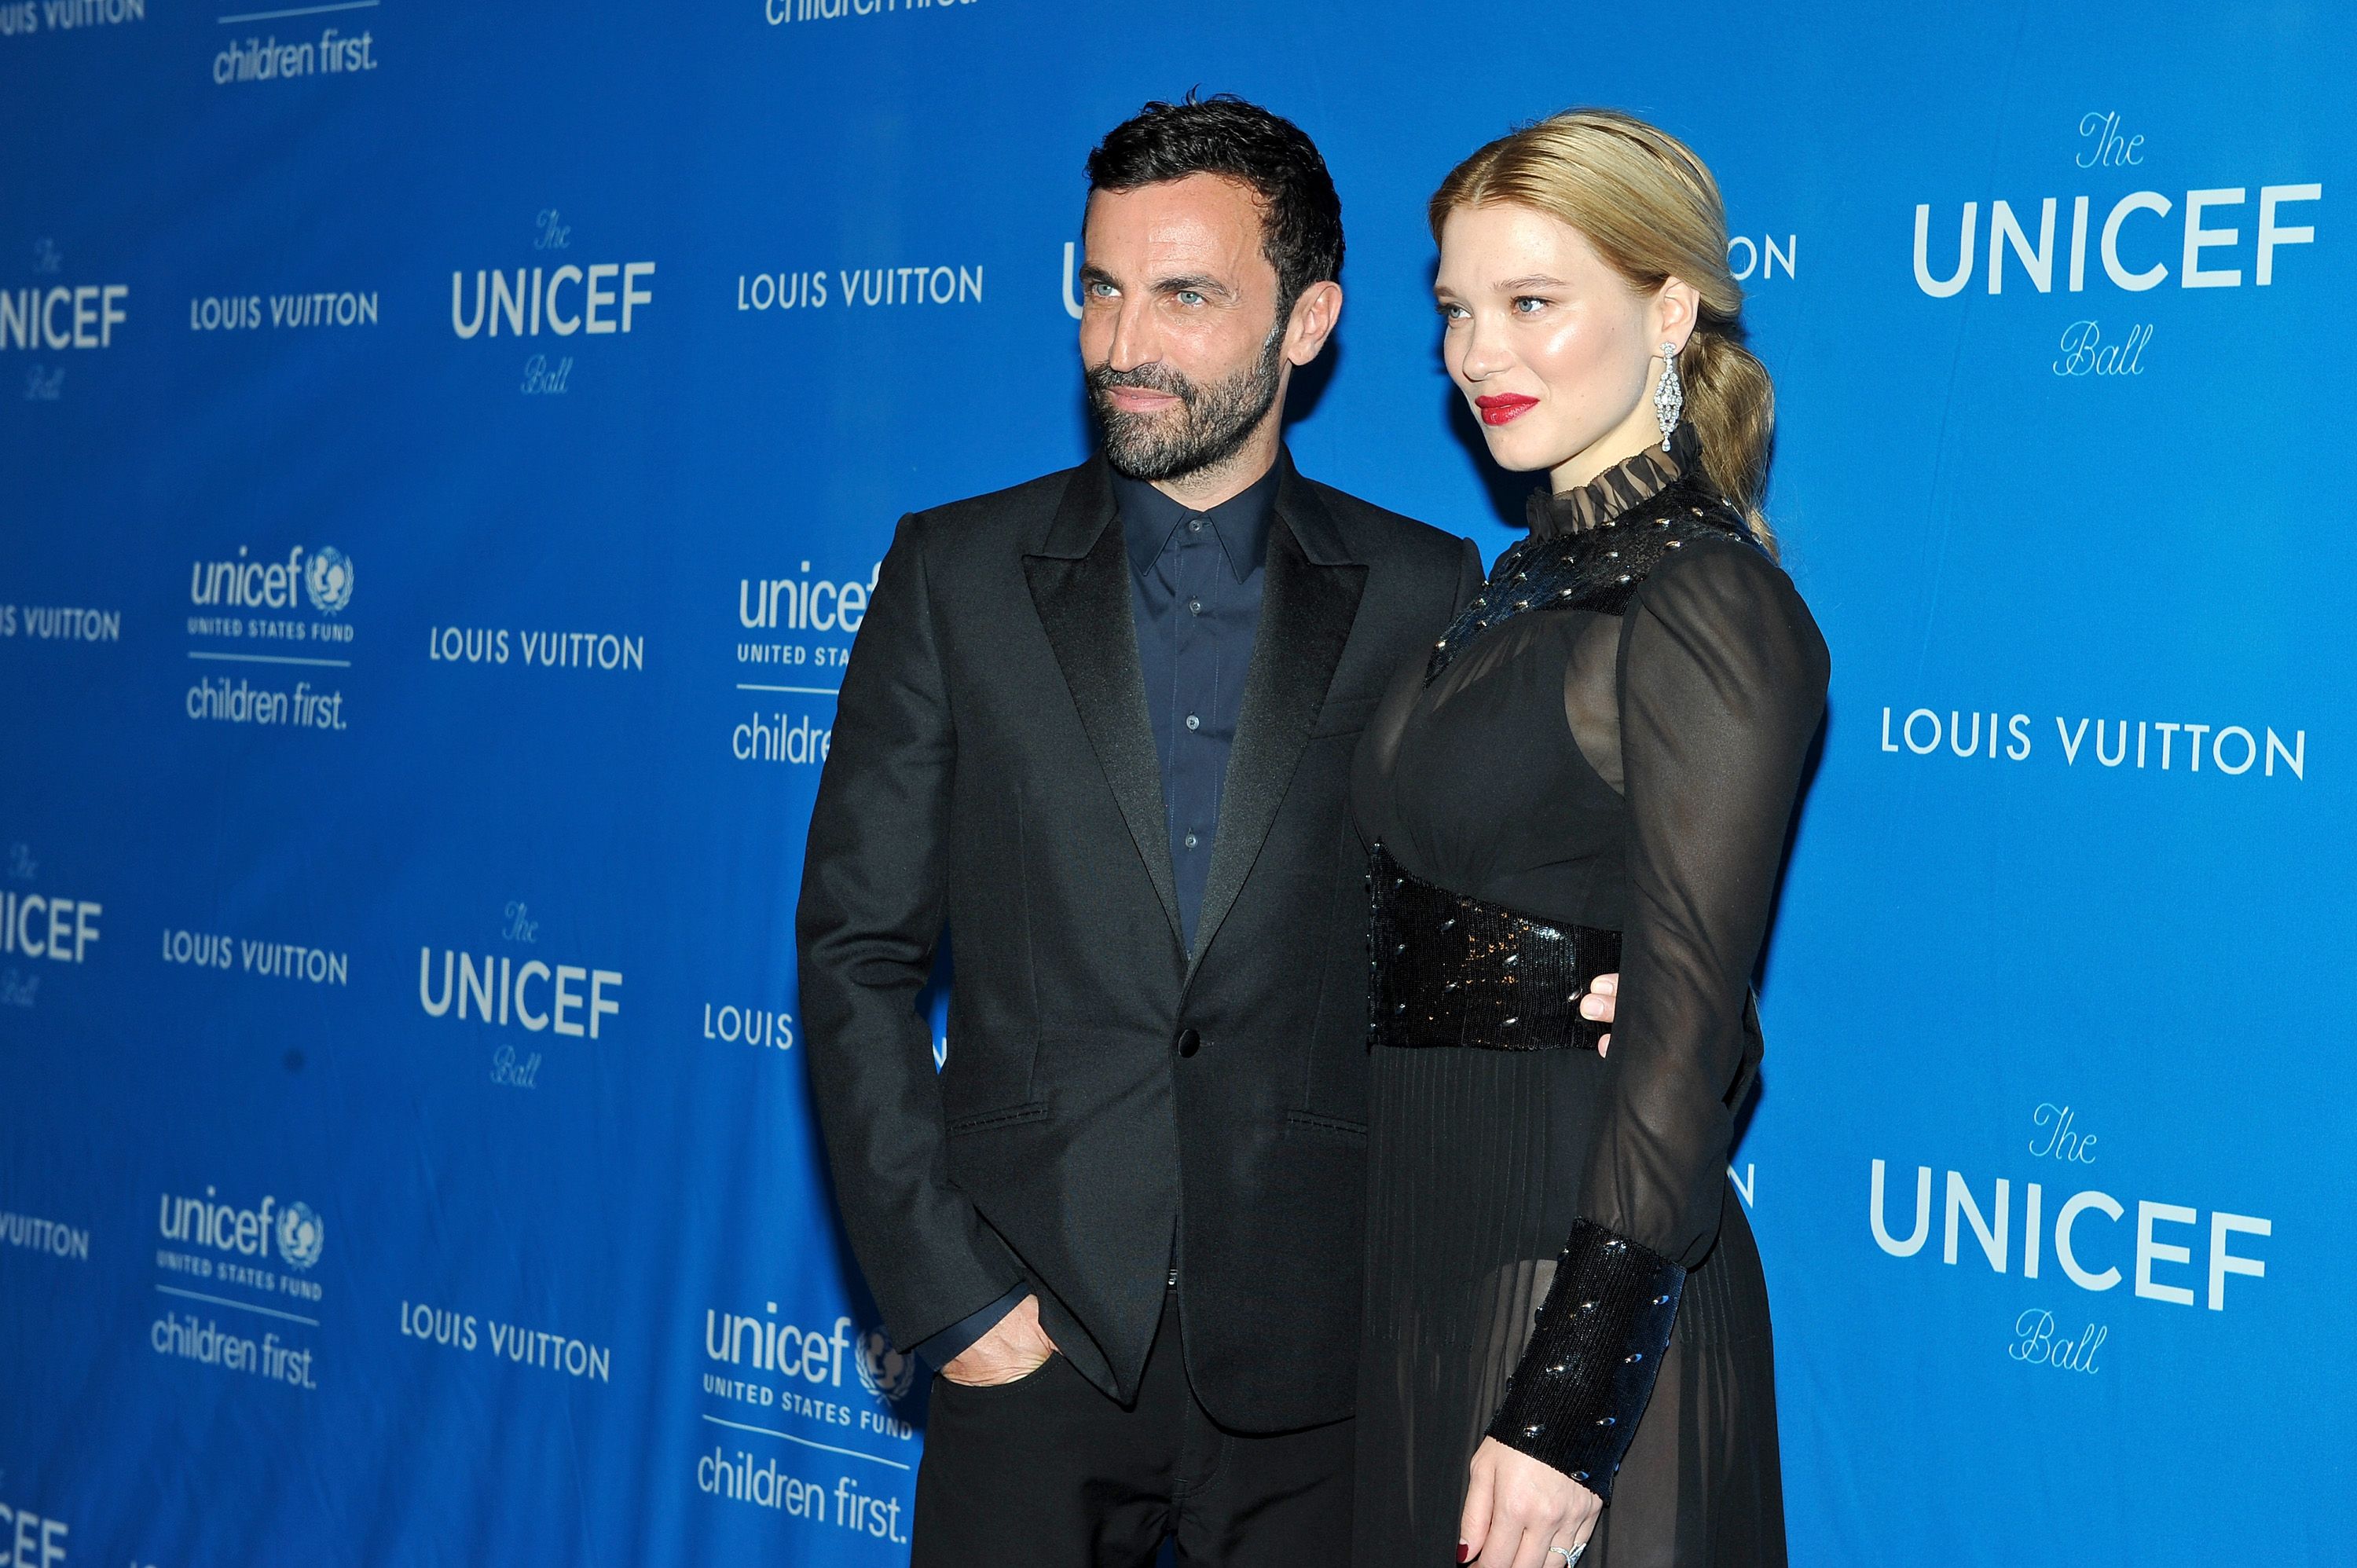 louis vuitton and unicef